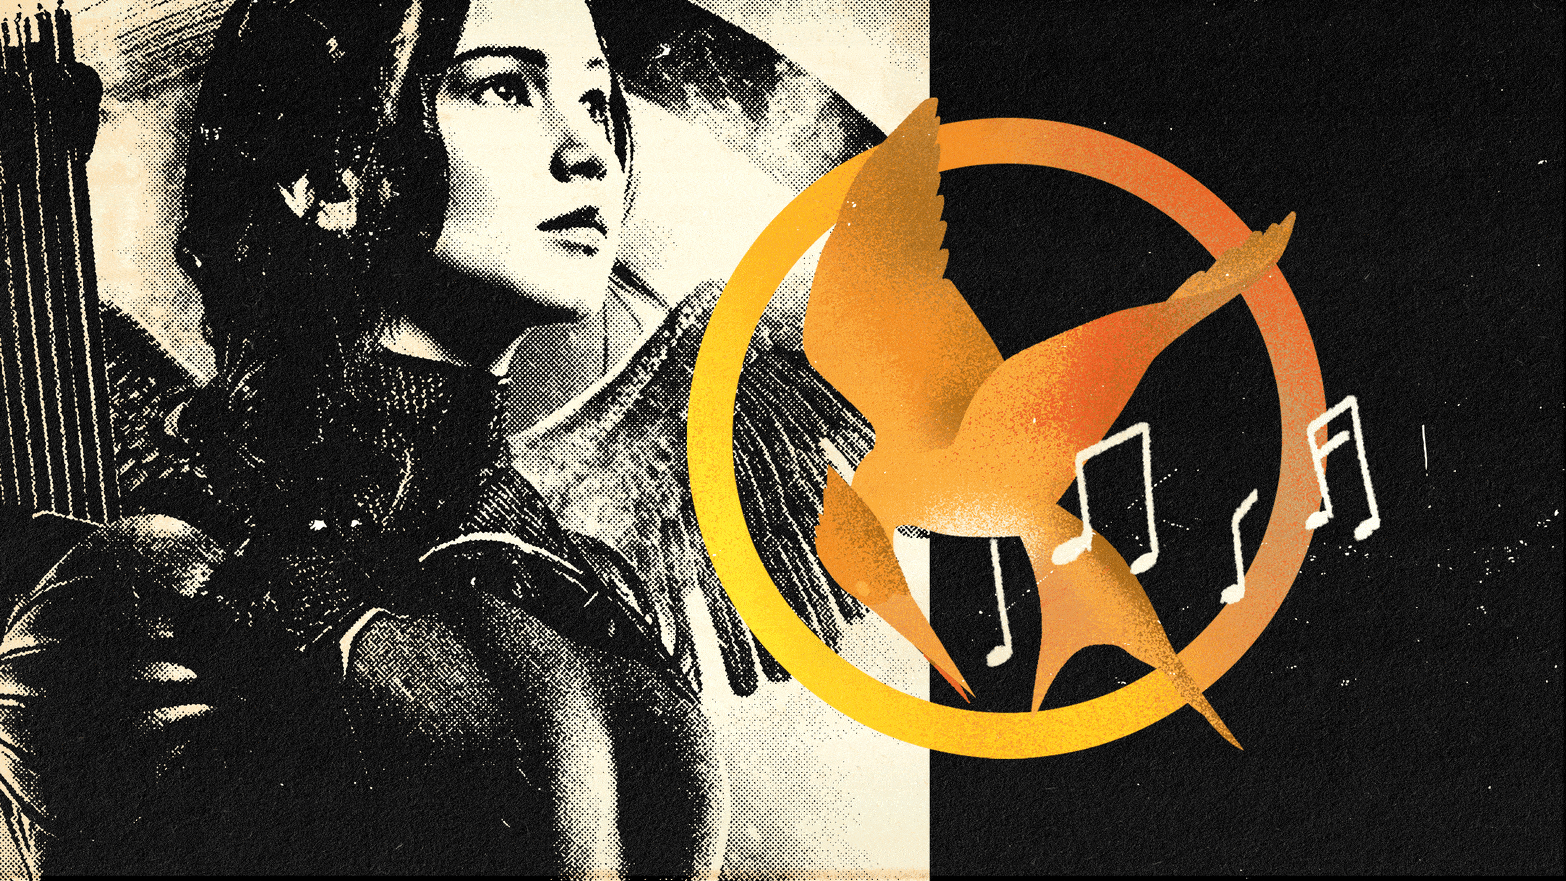 The Hunger Games Franchise's Greatest Legacy Is Its Soundtrack